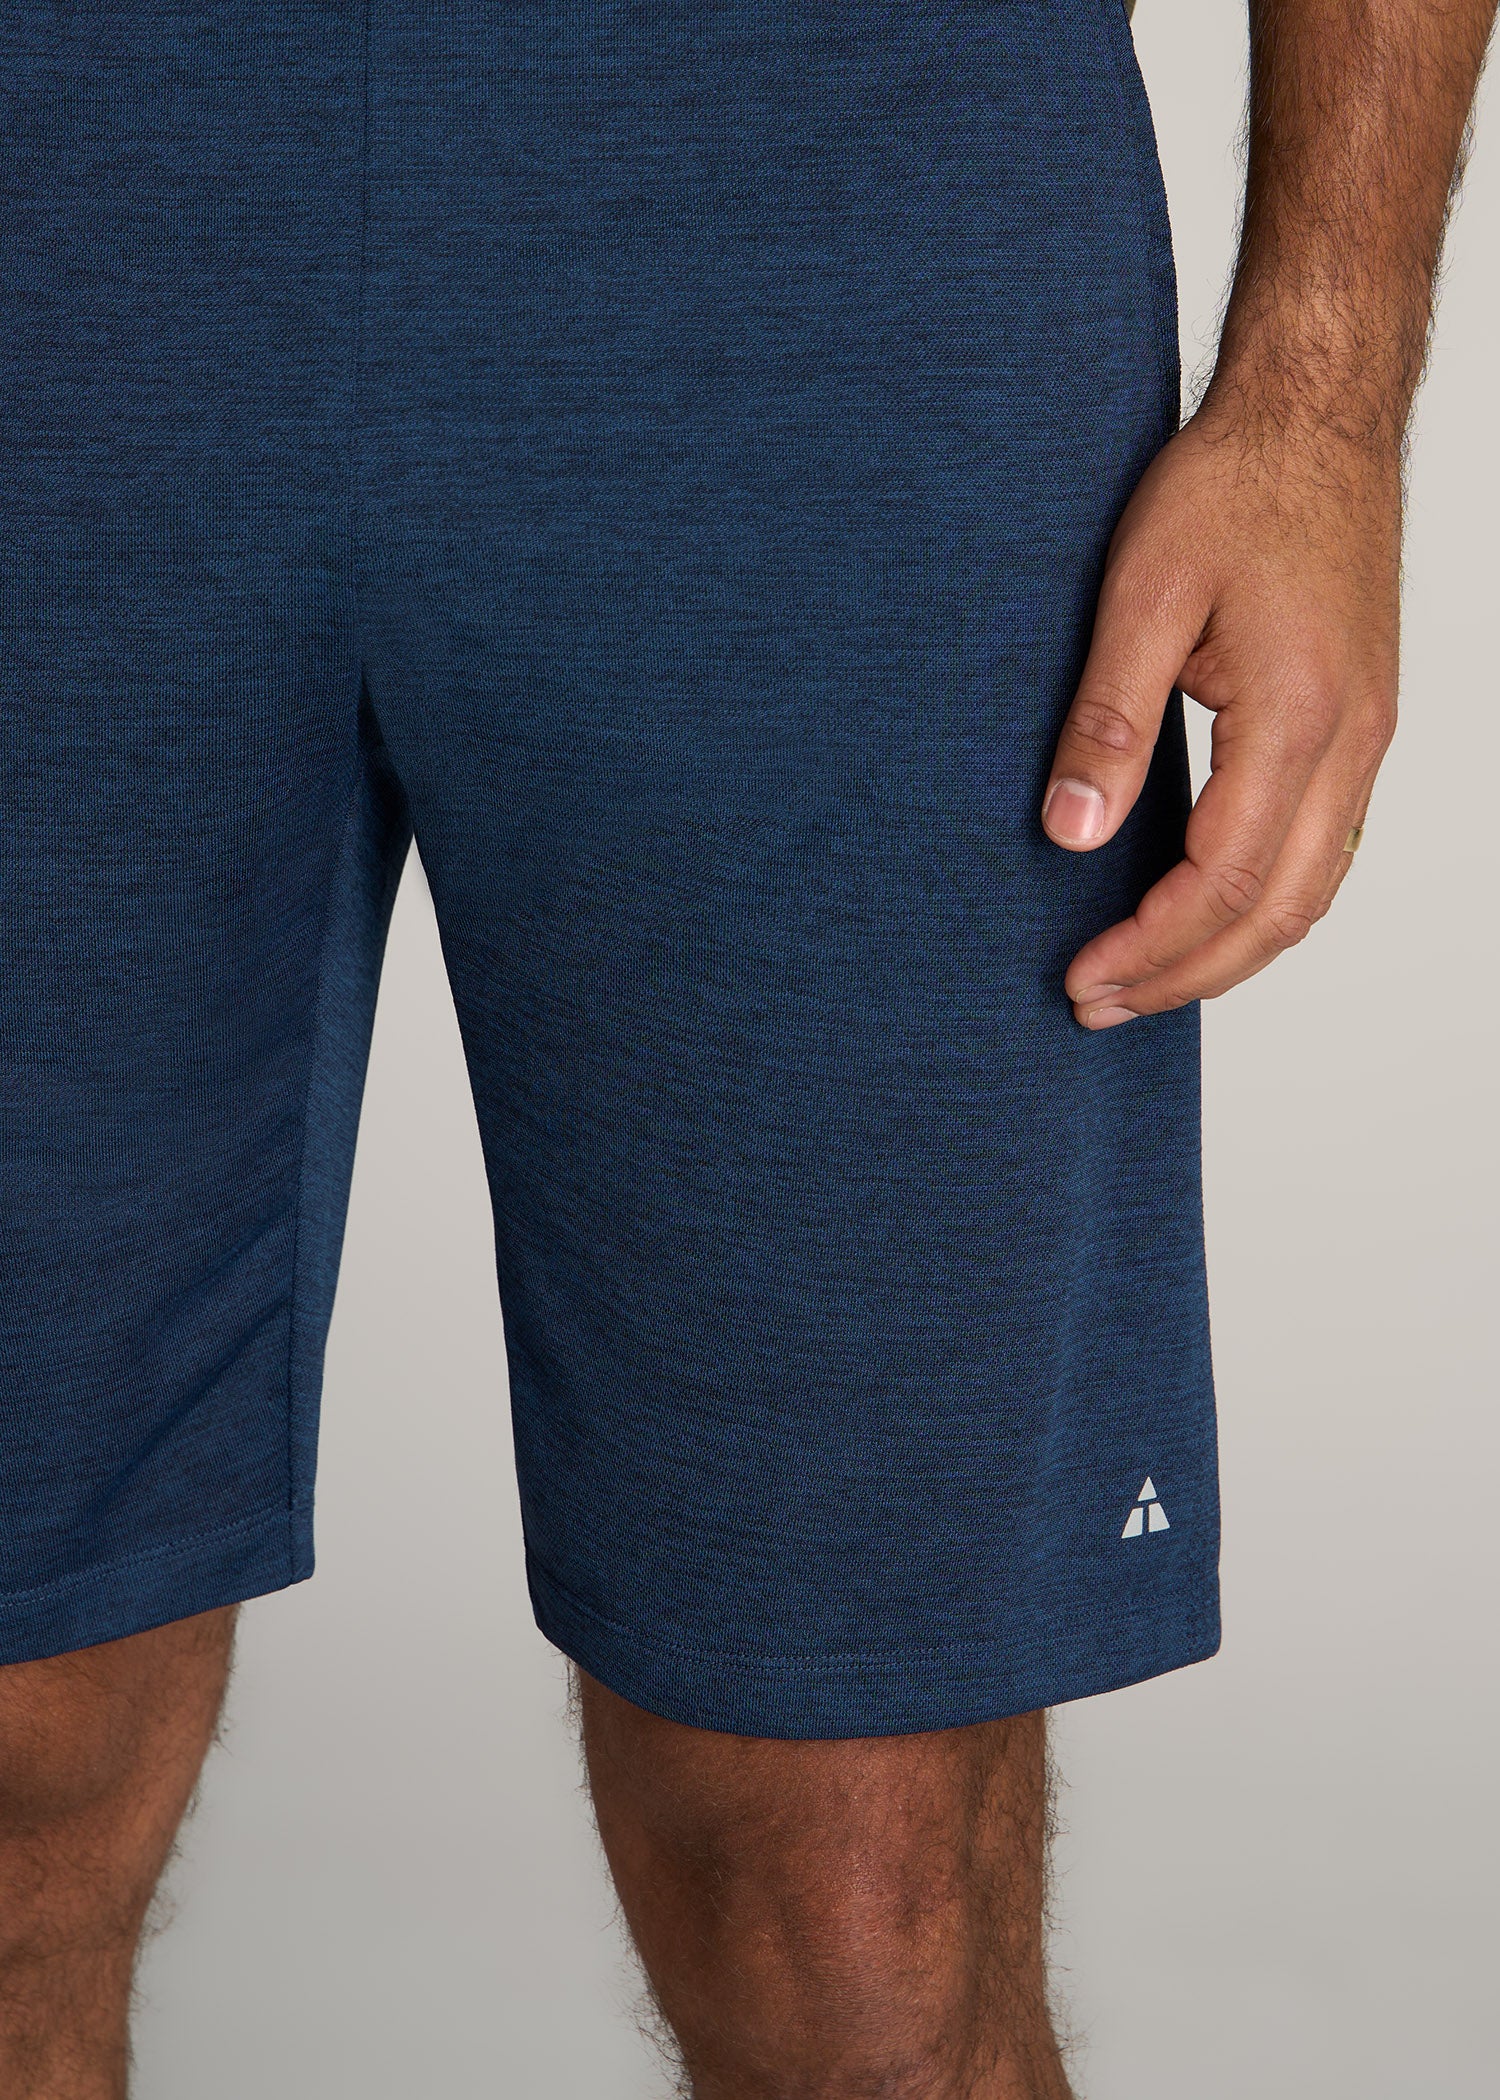 A.T. Performance Engineered Athletic Shorts for Tall Men in Black